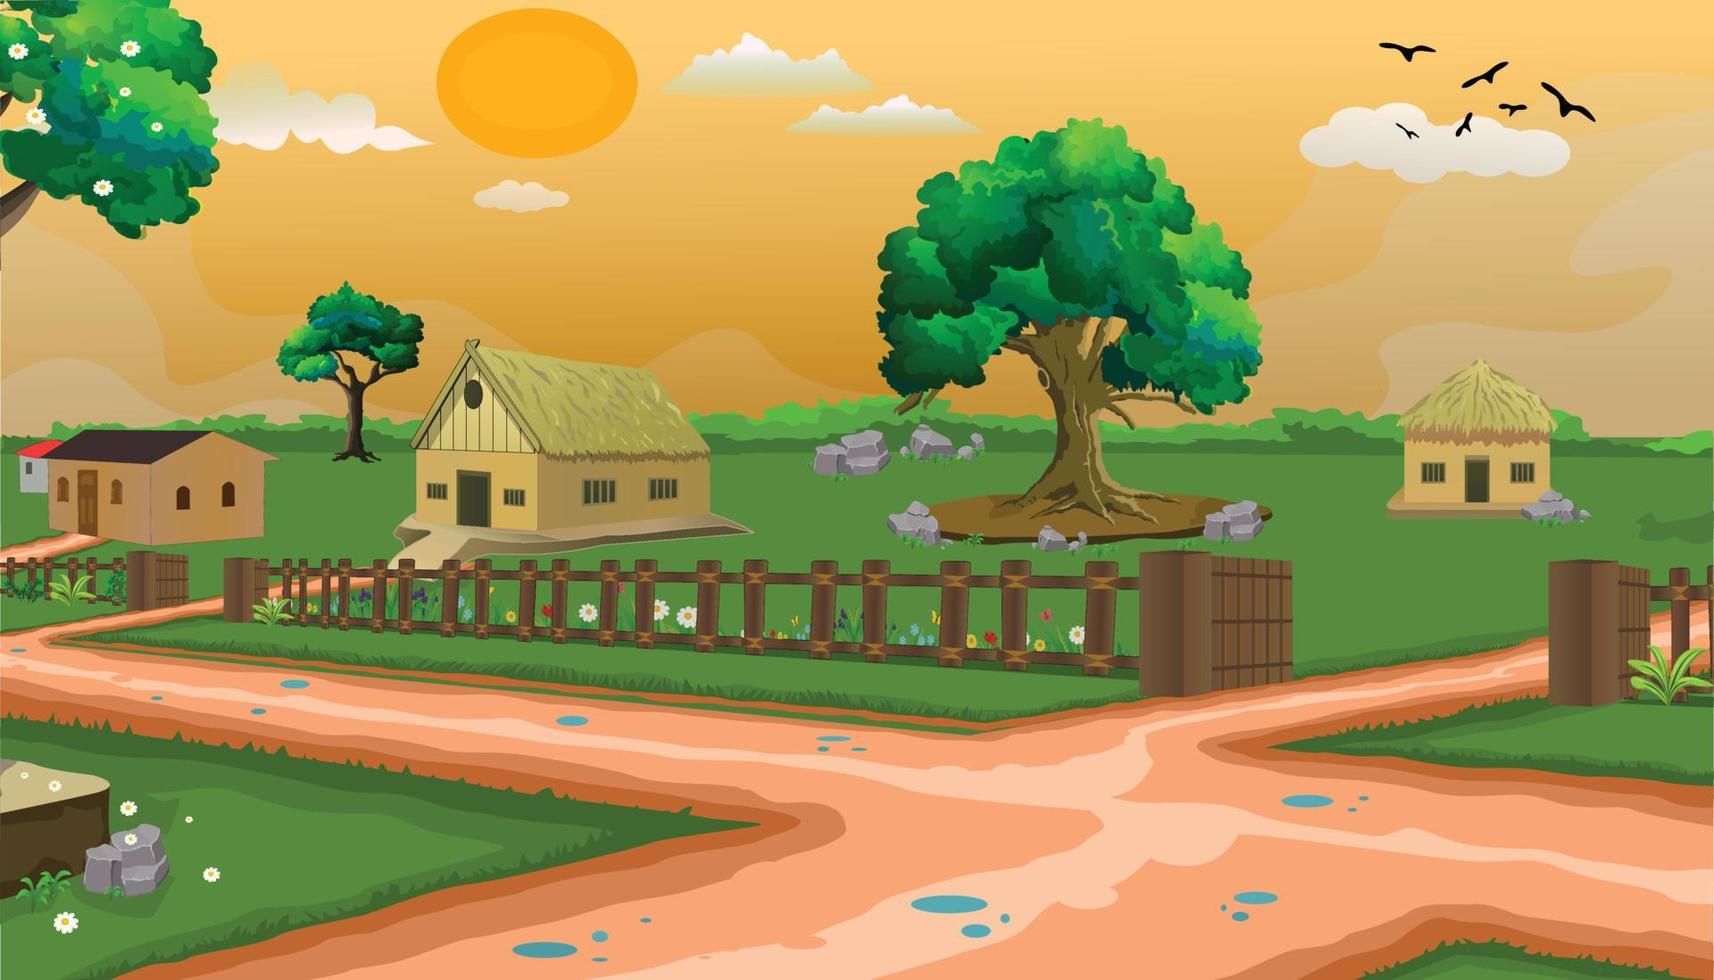 Download Village cartoon background illustration morning background with sun, fo